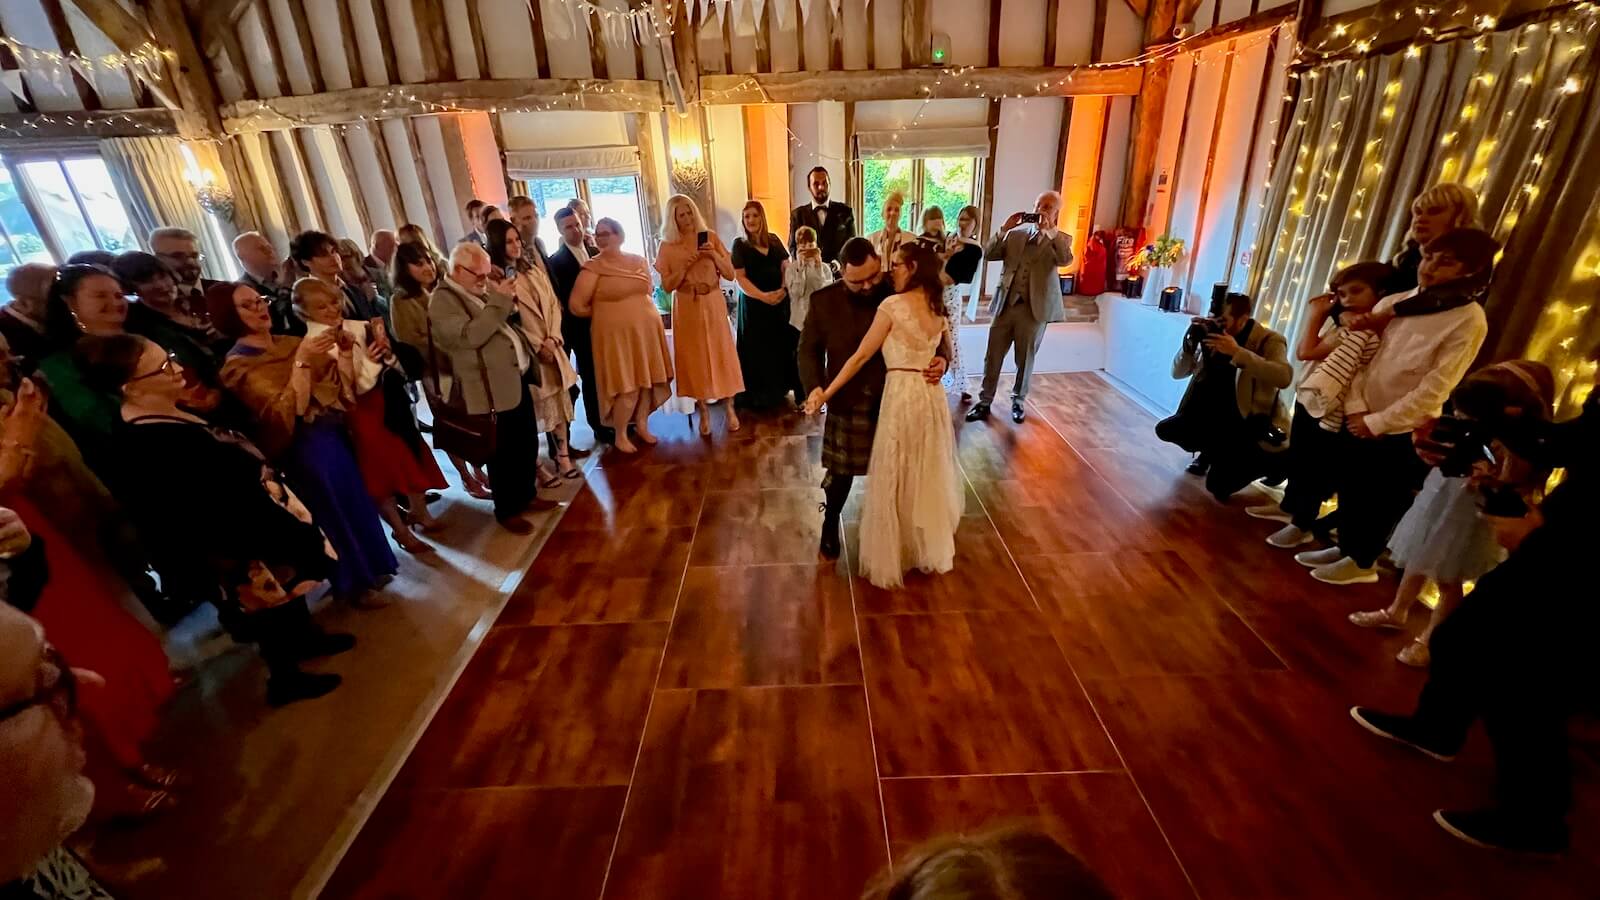 Poppy and Conor's first dance